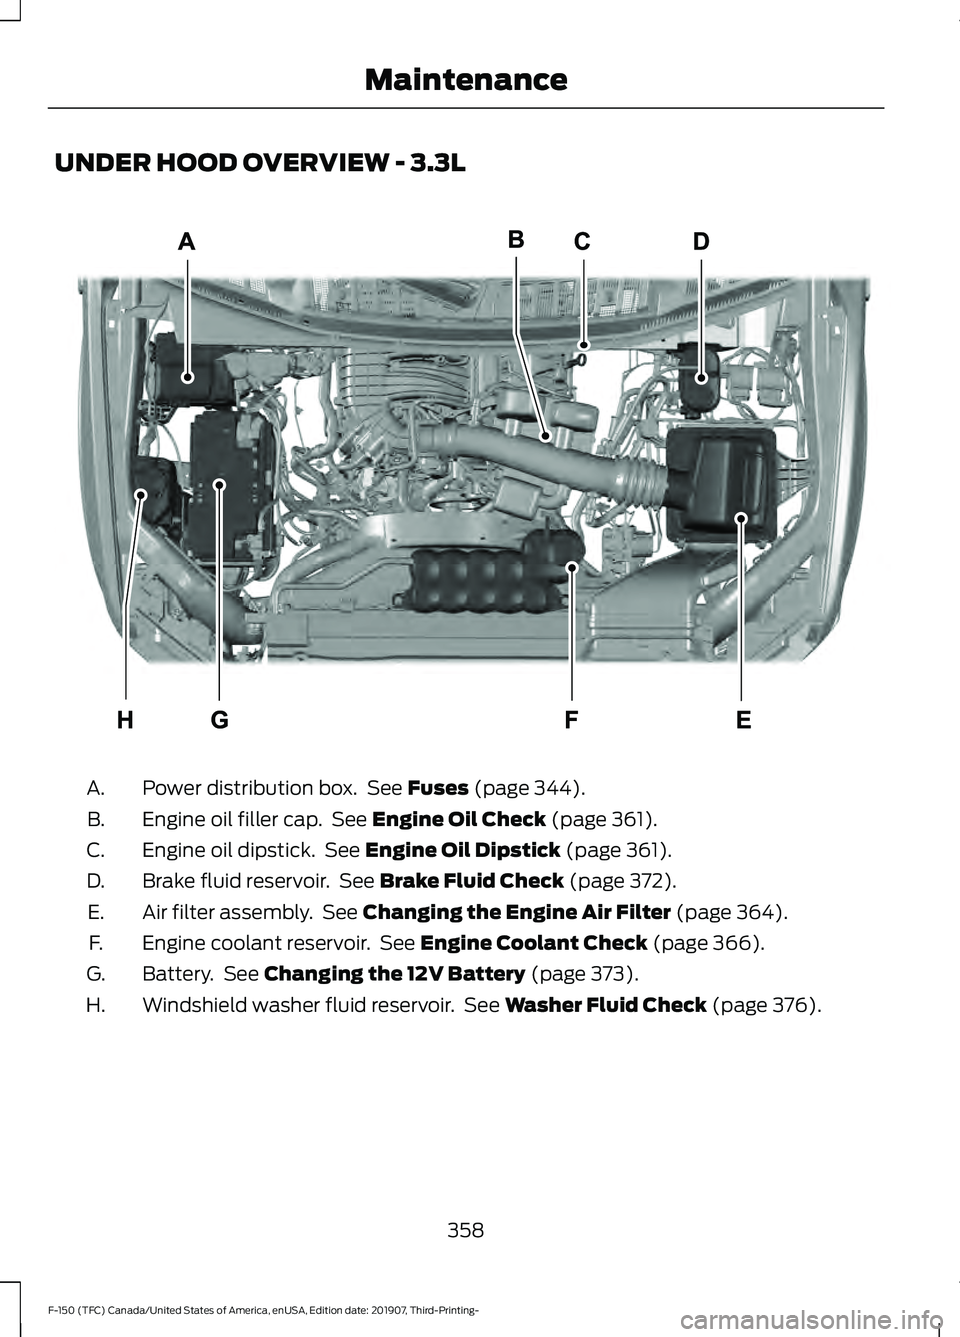 FORD F-150 2020  Owners Manual UNDER HOOD OVERVIEW - 3.3L
Power distribution box.  See Fuses (page 344).
A.
Engine oil filler cap.  See 
Engine Oil Check (page 361).
B.
Engine oil dipstick.  See 
Engine Oil Dipstick (page 361).
C.
